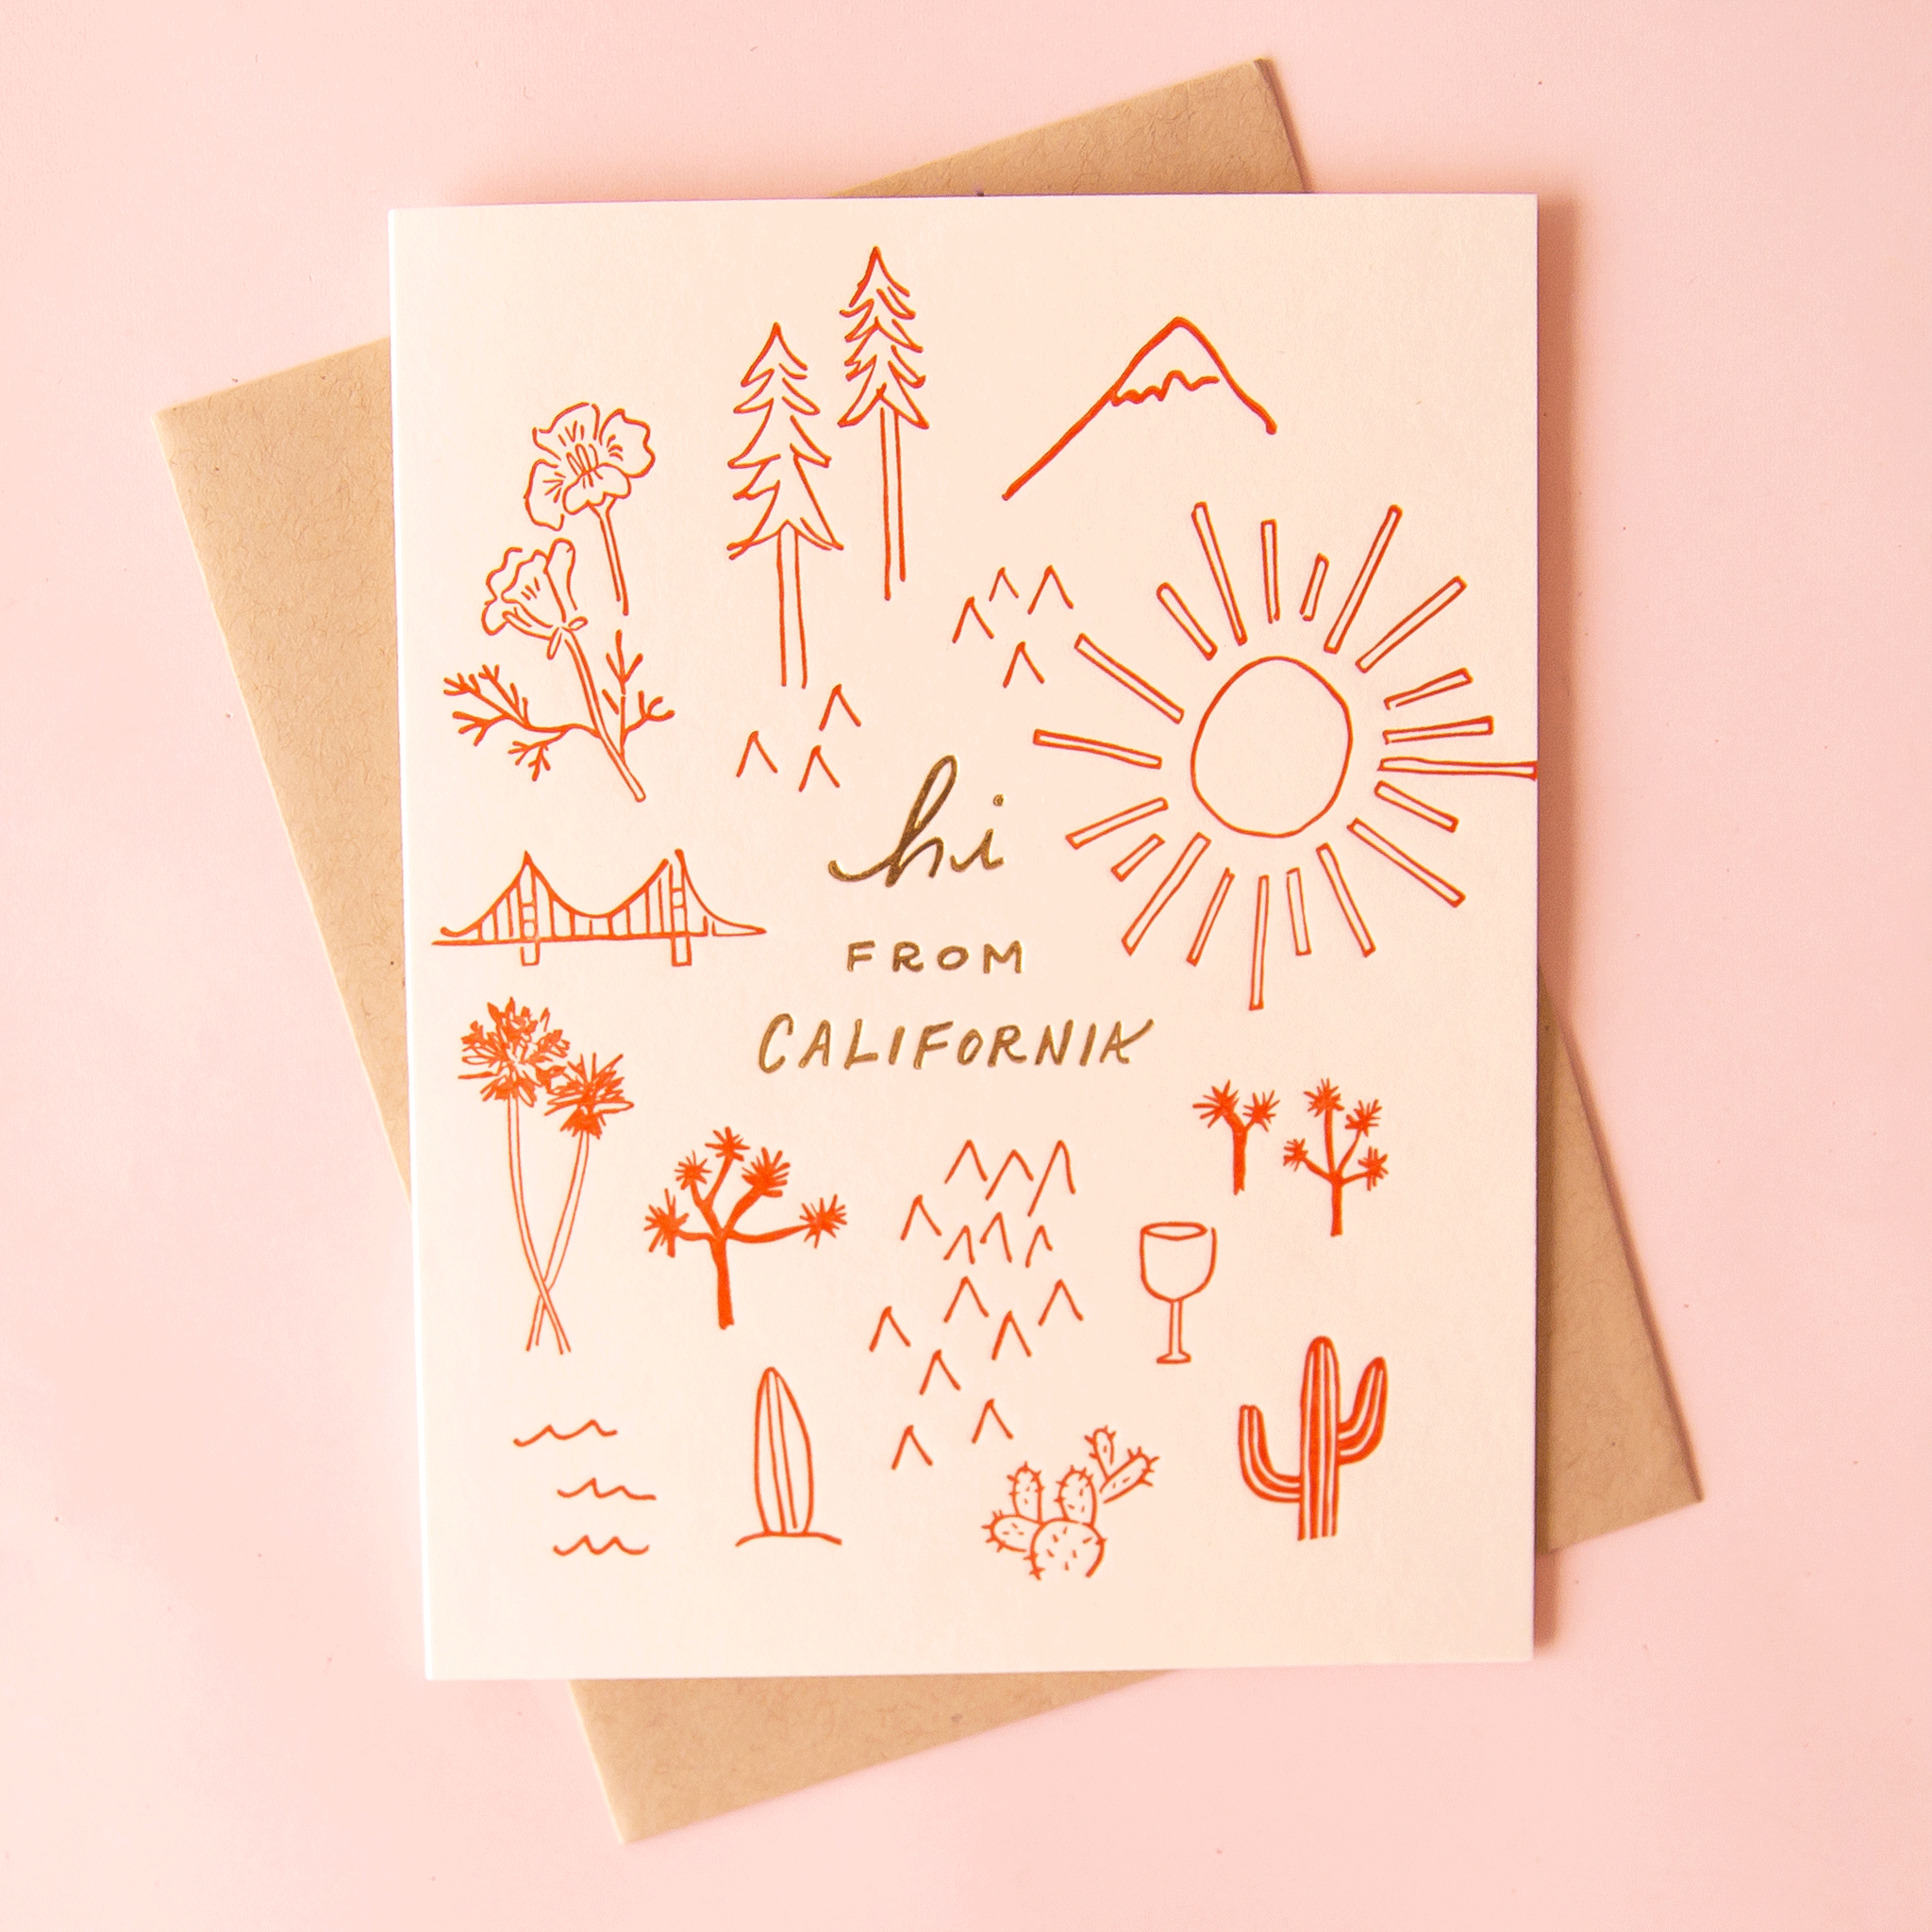 Photo of a cream colored greeting card that reads "hi from California" in gold leaf. Rust colored simple line drawings of poppy flowers, trees, mountains, a sun, cacti, waves and the Golden Gate Bridge surround the writing. The card is laying on a pink surface with 3 match books surrounding the card.